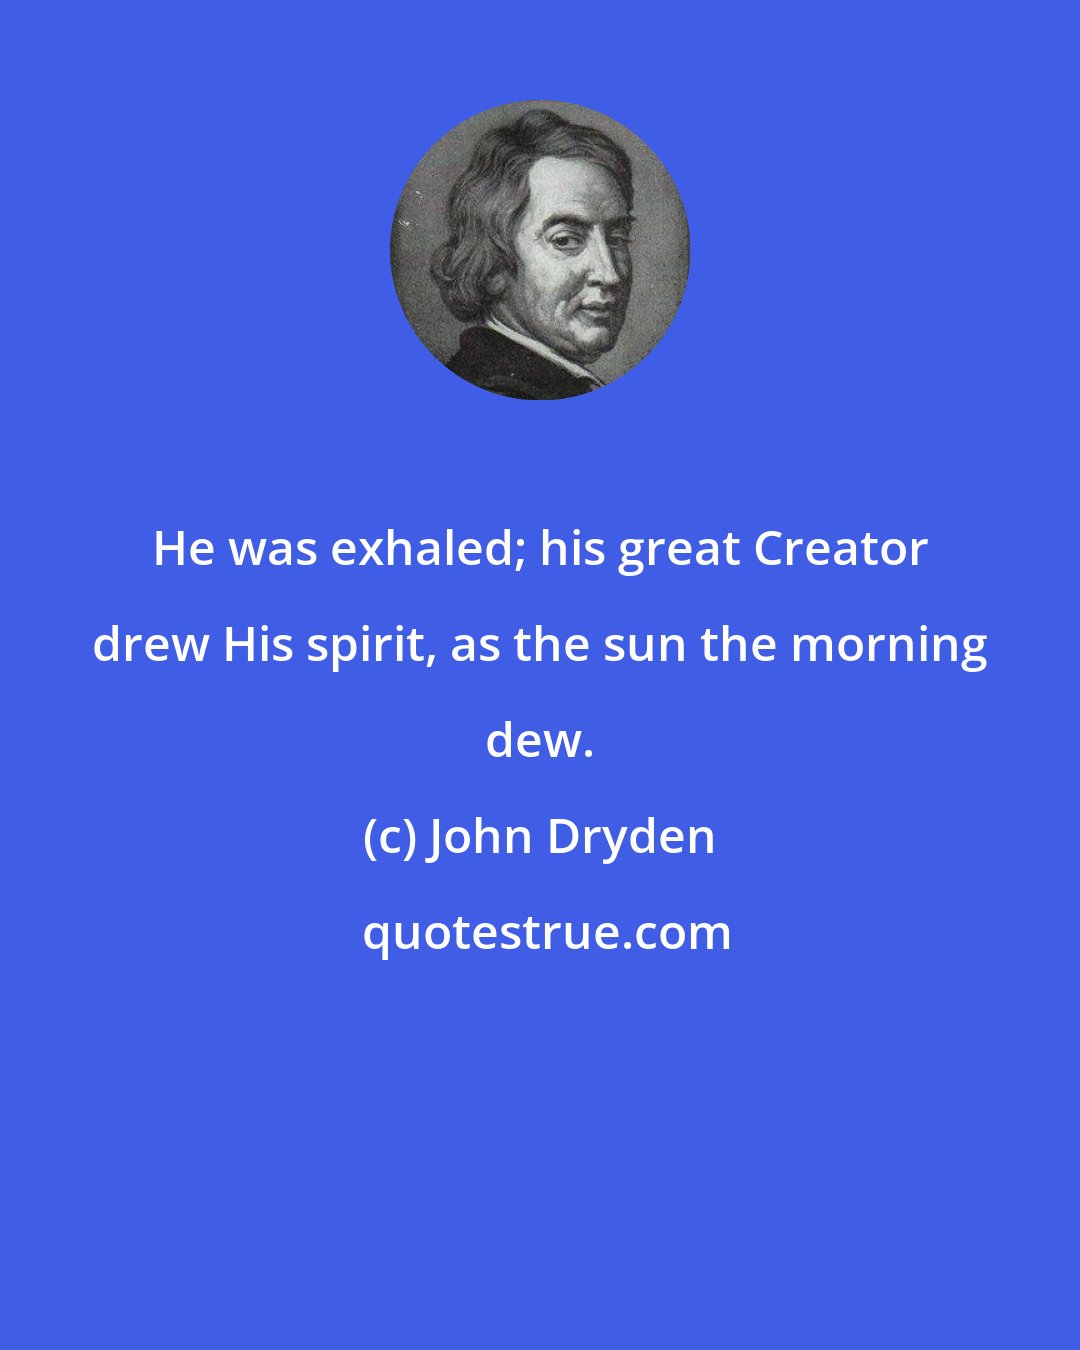 John Dryden: He was exhaled; his great Creator drew His spirit, as the sun the morning dew.